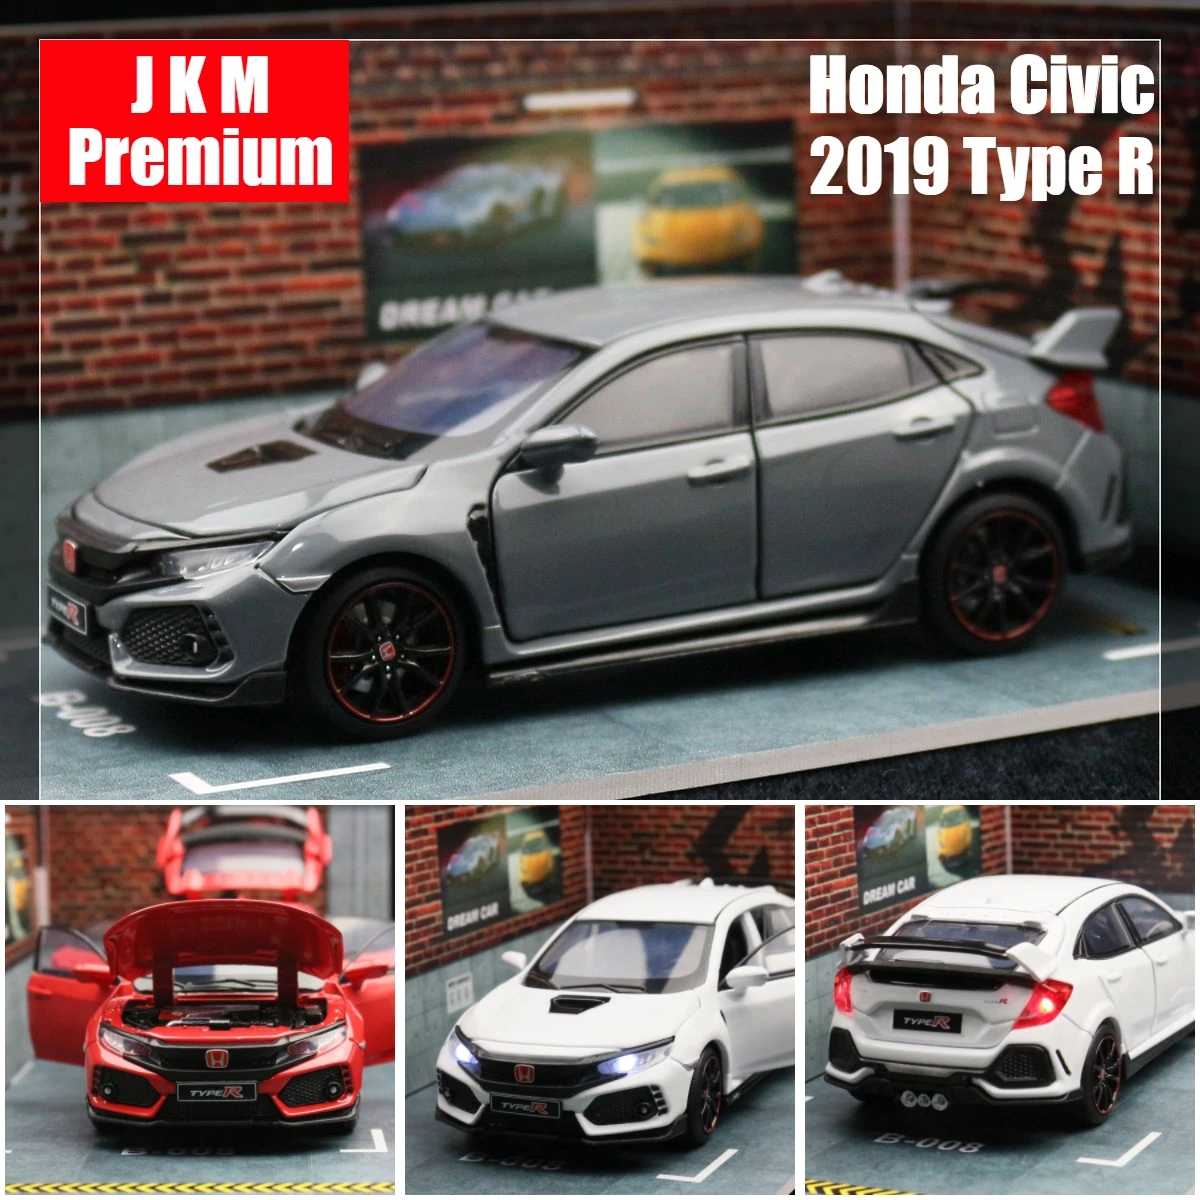 1/32 Honda Civic Type R Toy Car For Children Diecast Miniature Model Pull Back Doors Openable Sound Light Collection Gift Boys